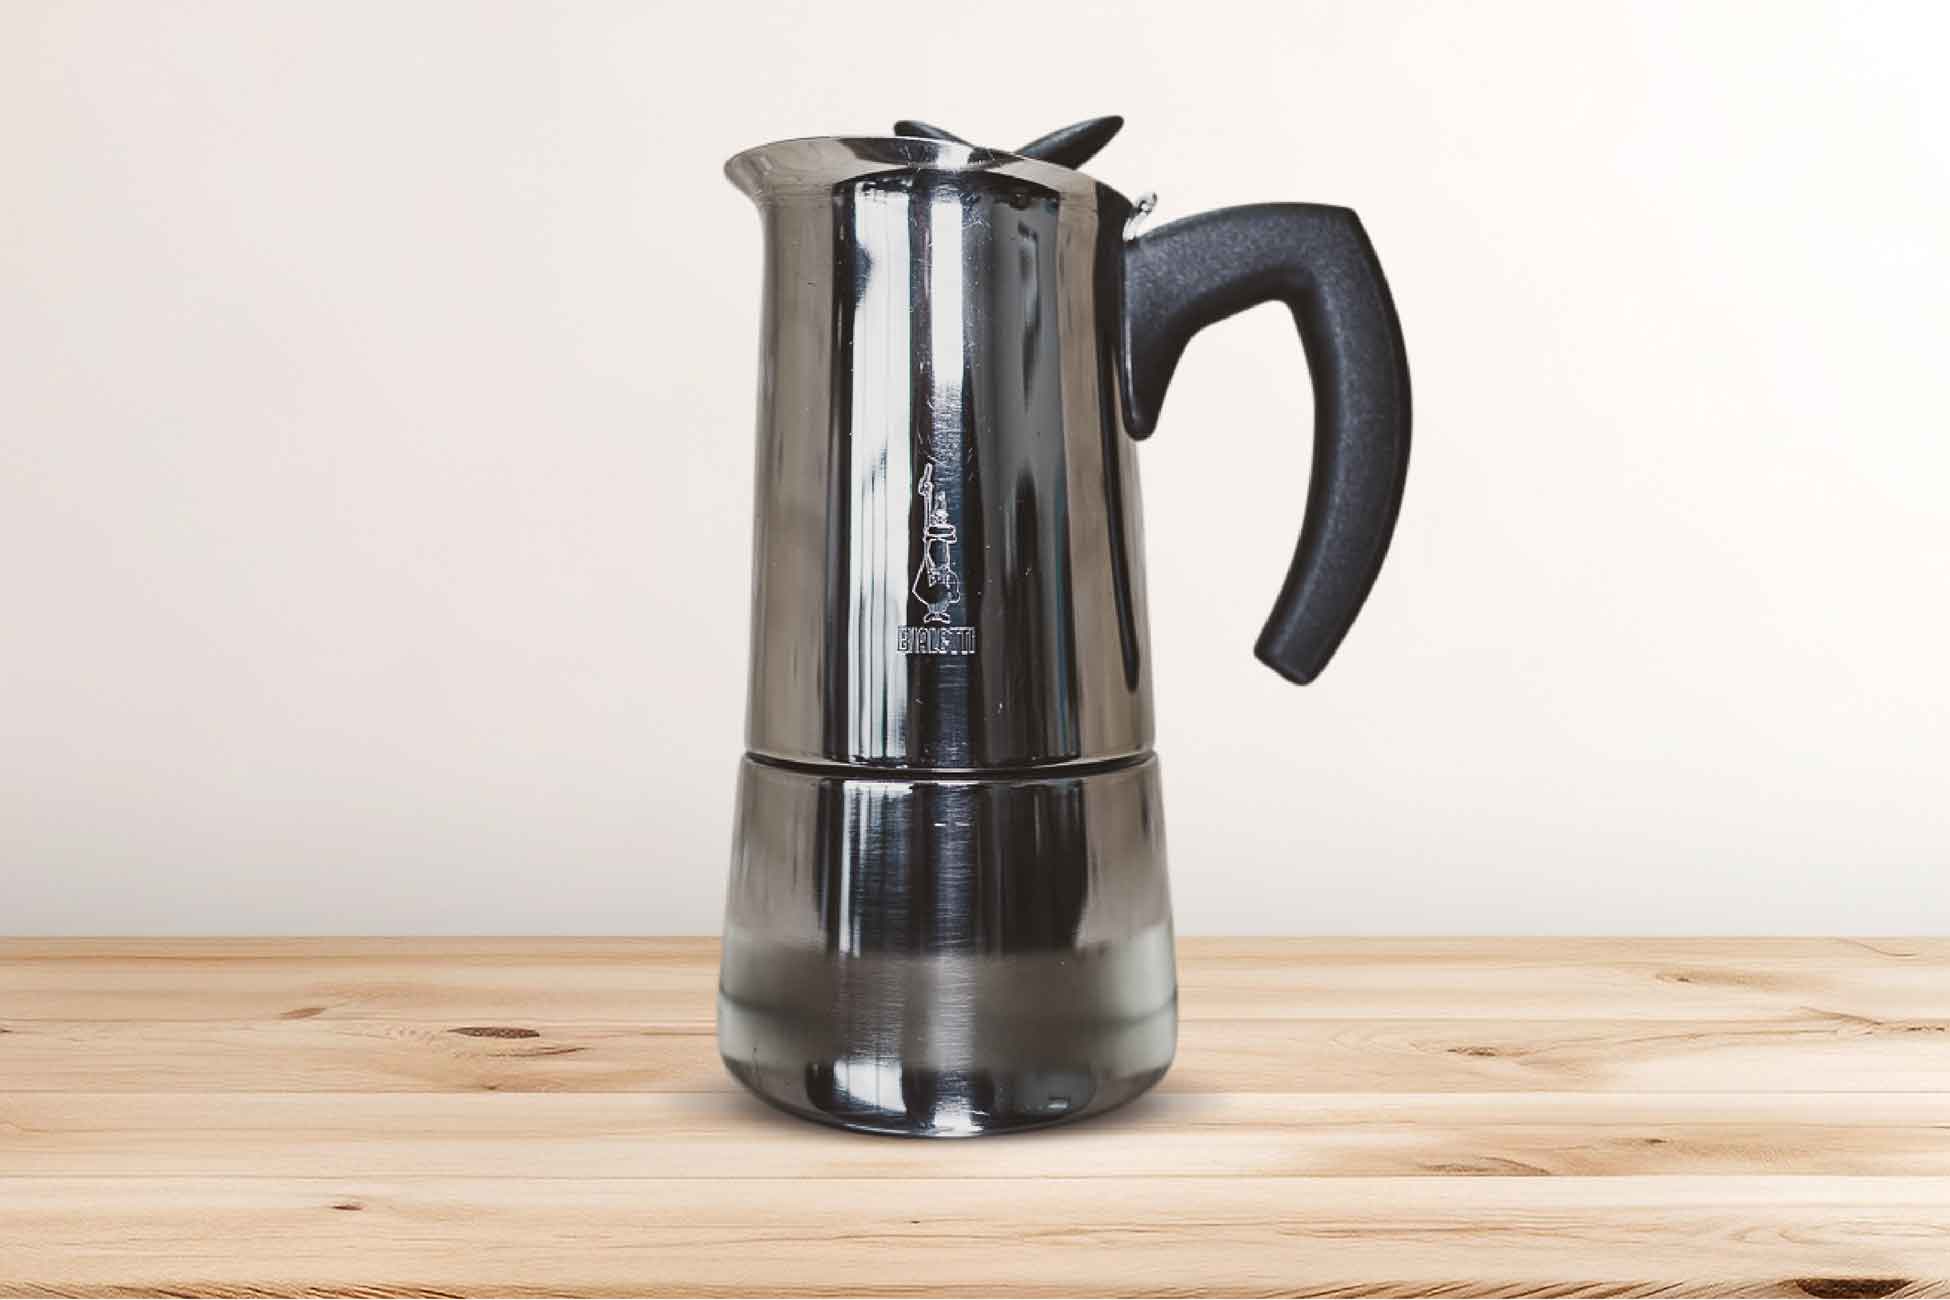 Bialetti Stainless Steel stovetop 10 cup Moka Pot